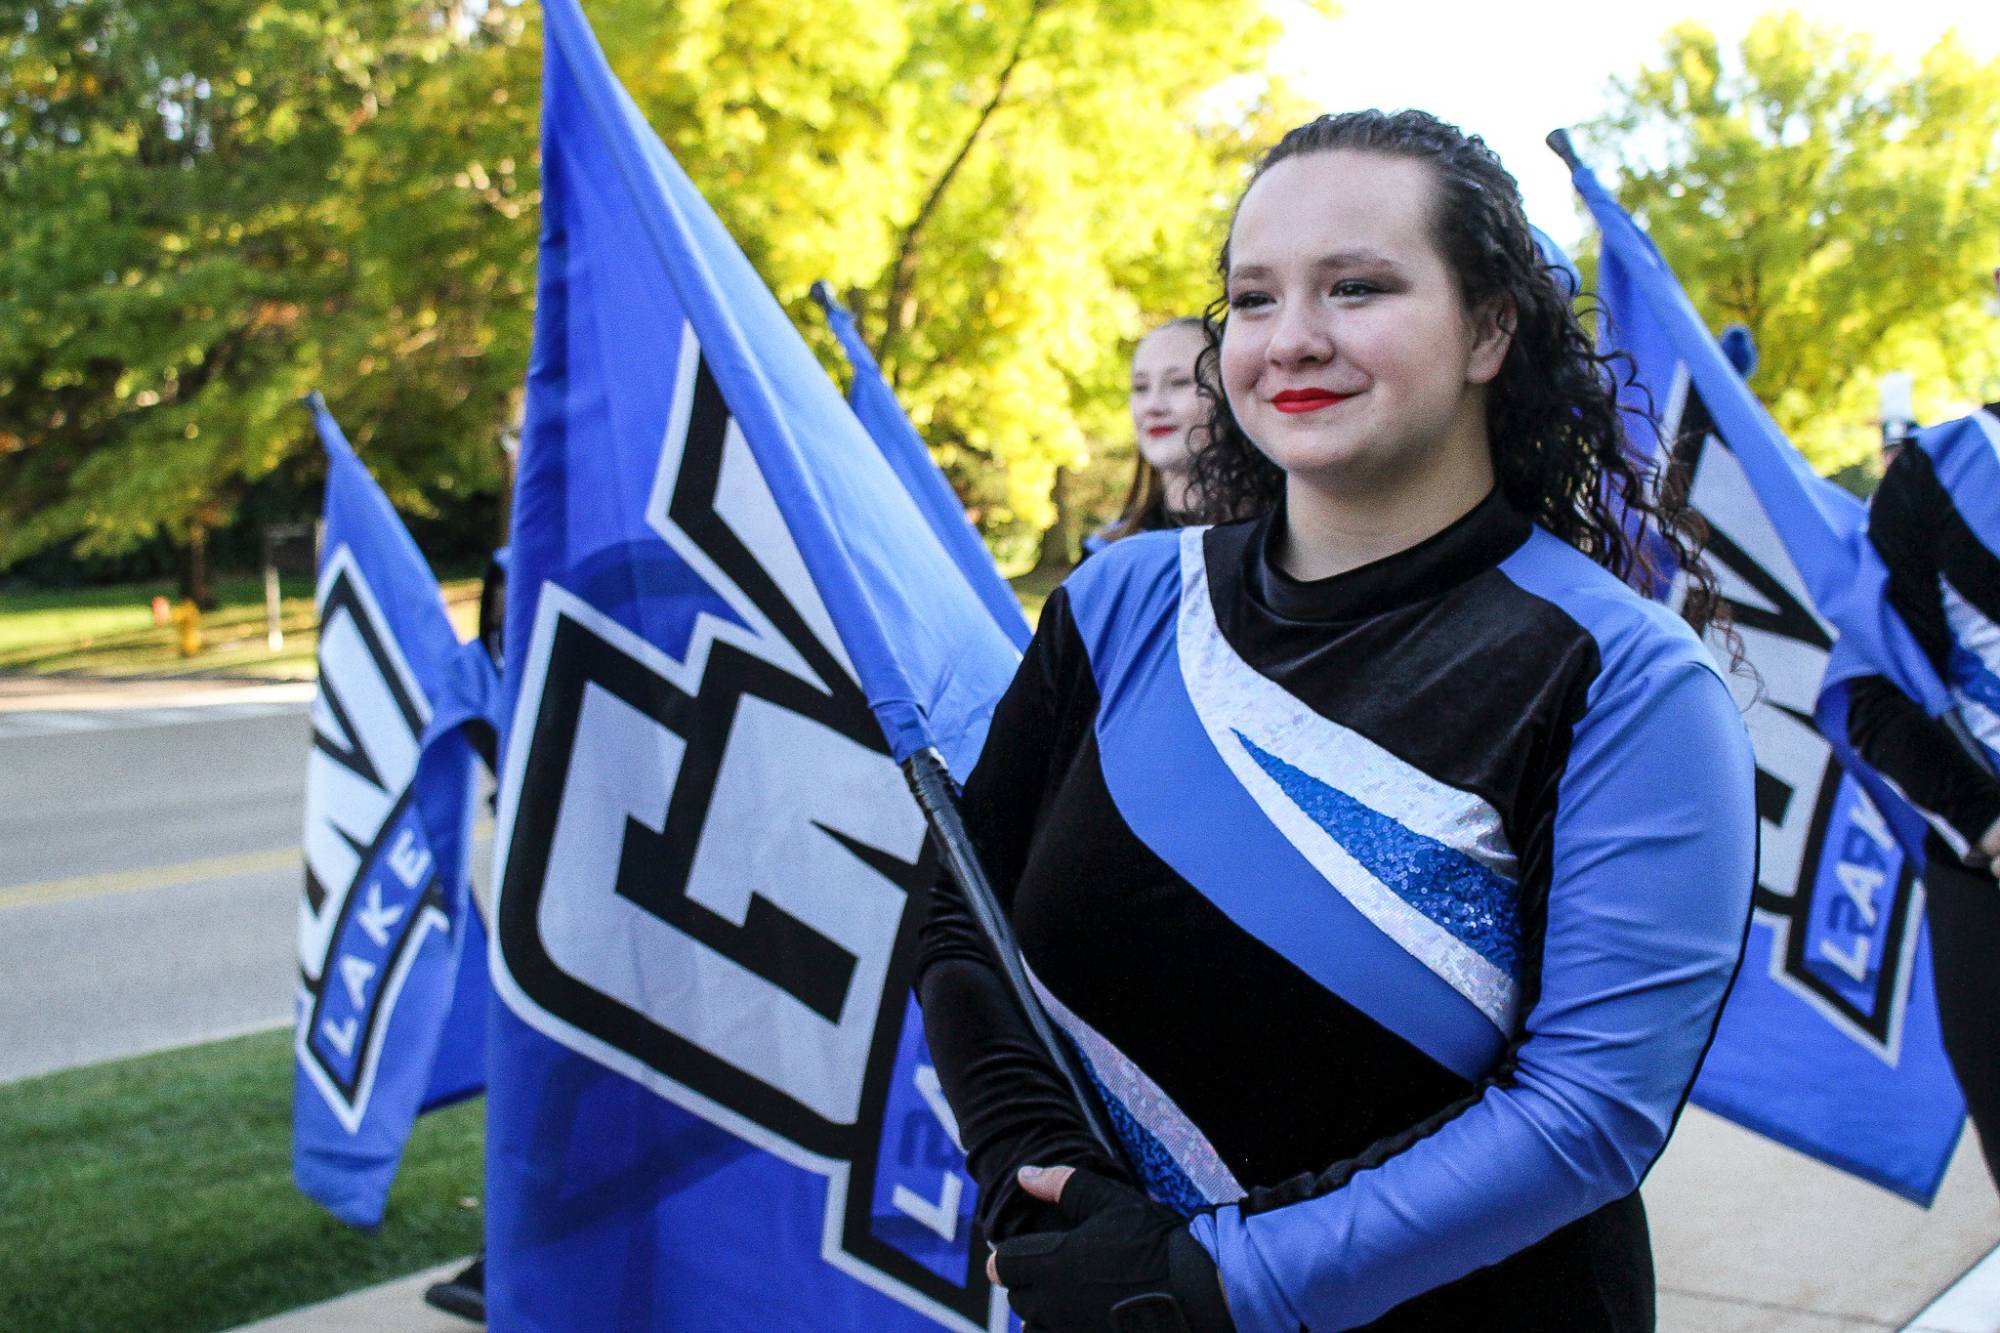 LMB Color Guard member holding their flag while marching down to Lubber's stadium on game day